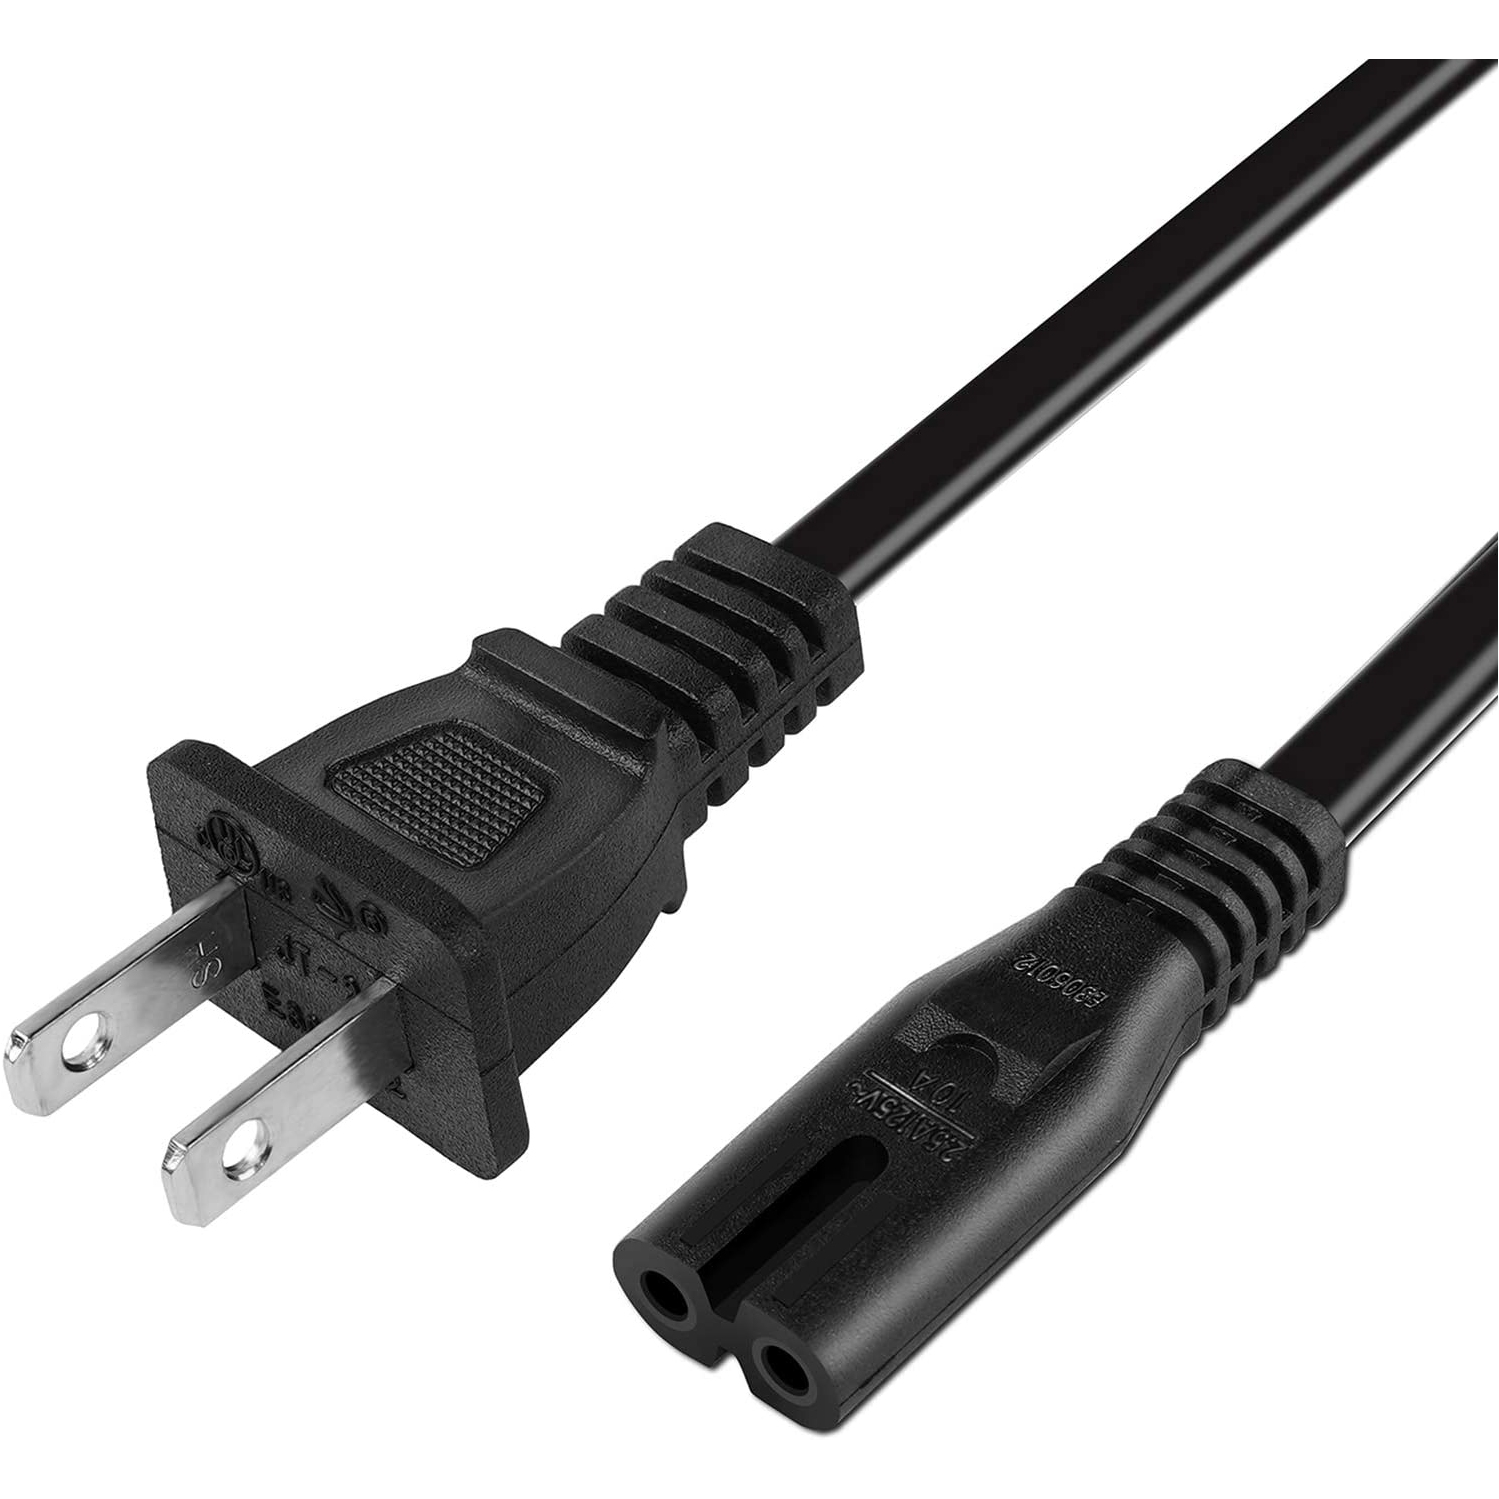 Printer Power Cord Cable Compatible HP OfficeJet Pro 4630 3830 8600 4655 6600 6978 6968 8610 8620 8625 8630 8710 8720